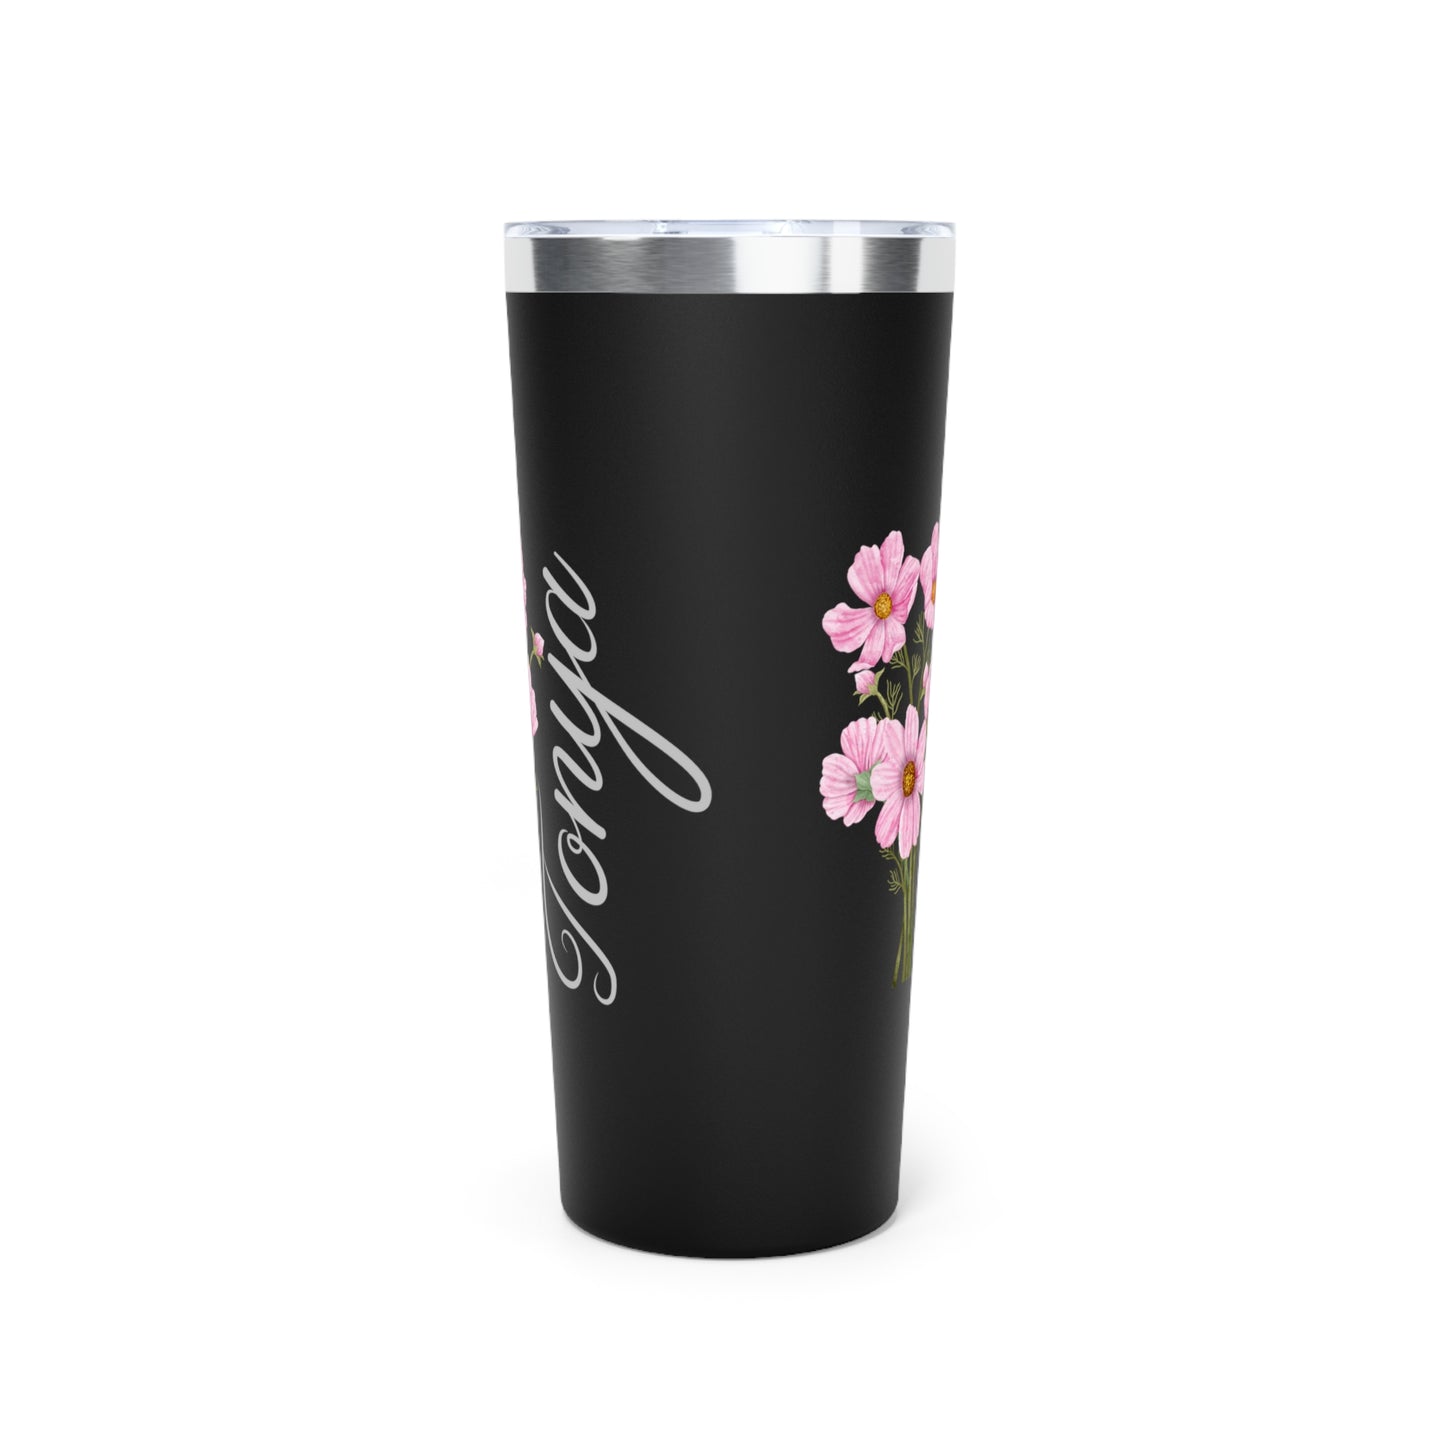 October Personalized Birth Flower Tumbler, Personalized Birth Flower Coffee Cup With Name, Gifts for Her, Bridesmaid Proposal, Party Favor